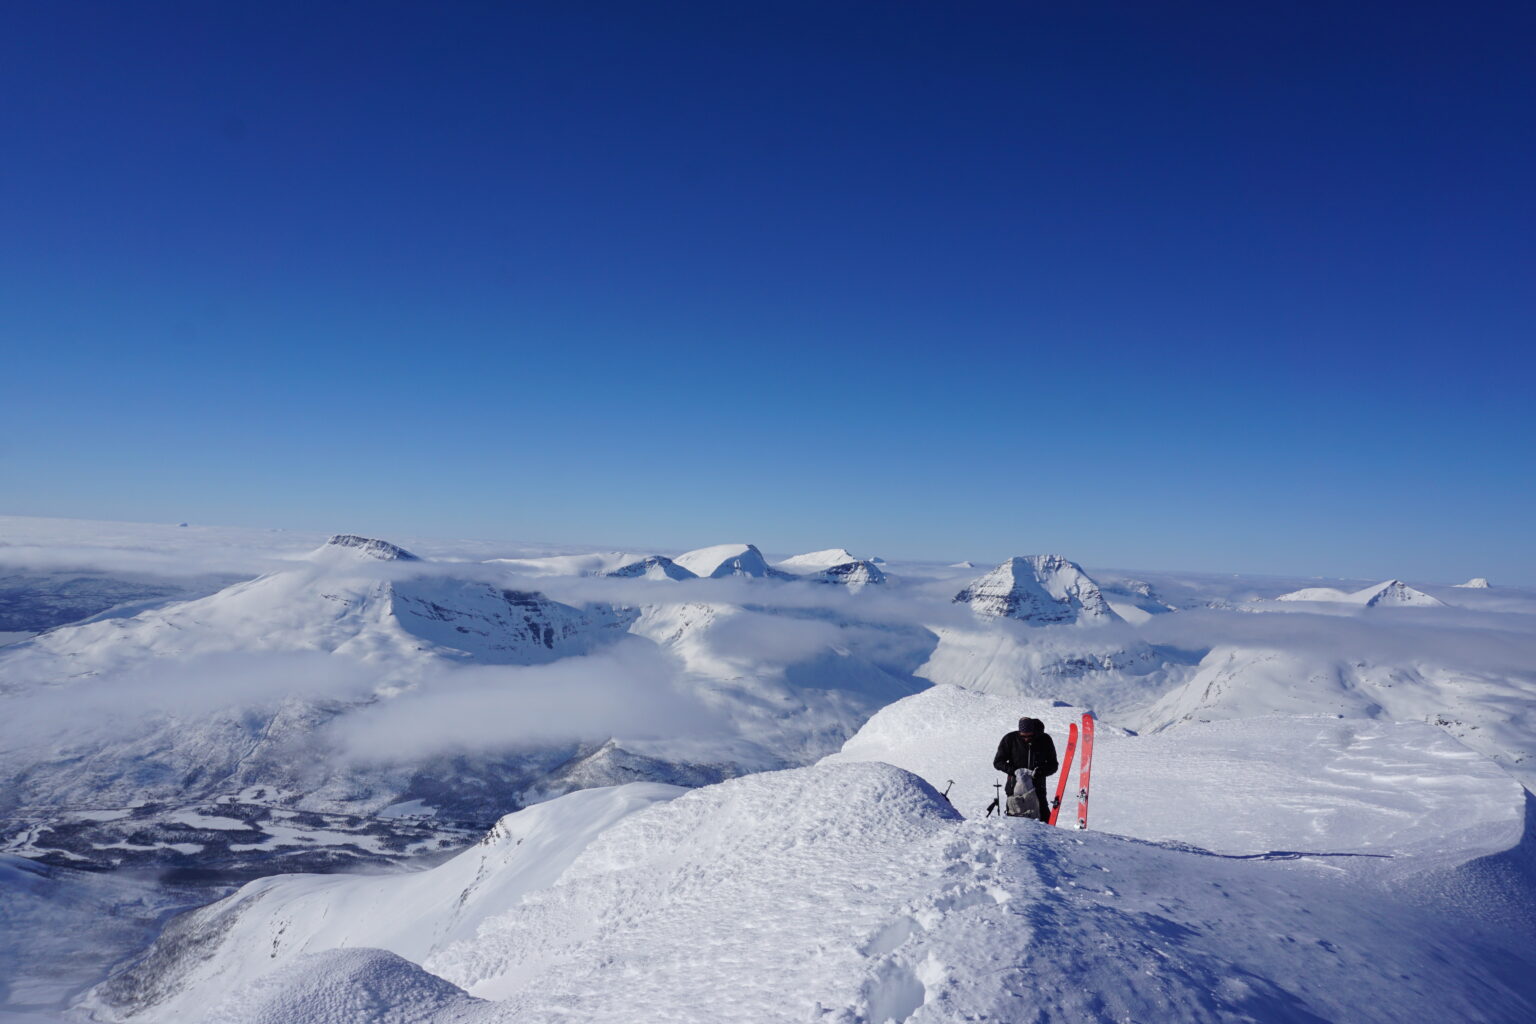 Standing on the summit of Istinden before dropping into the East Bowl